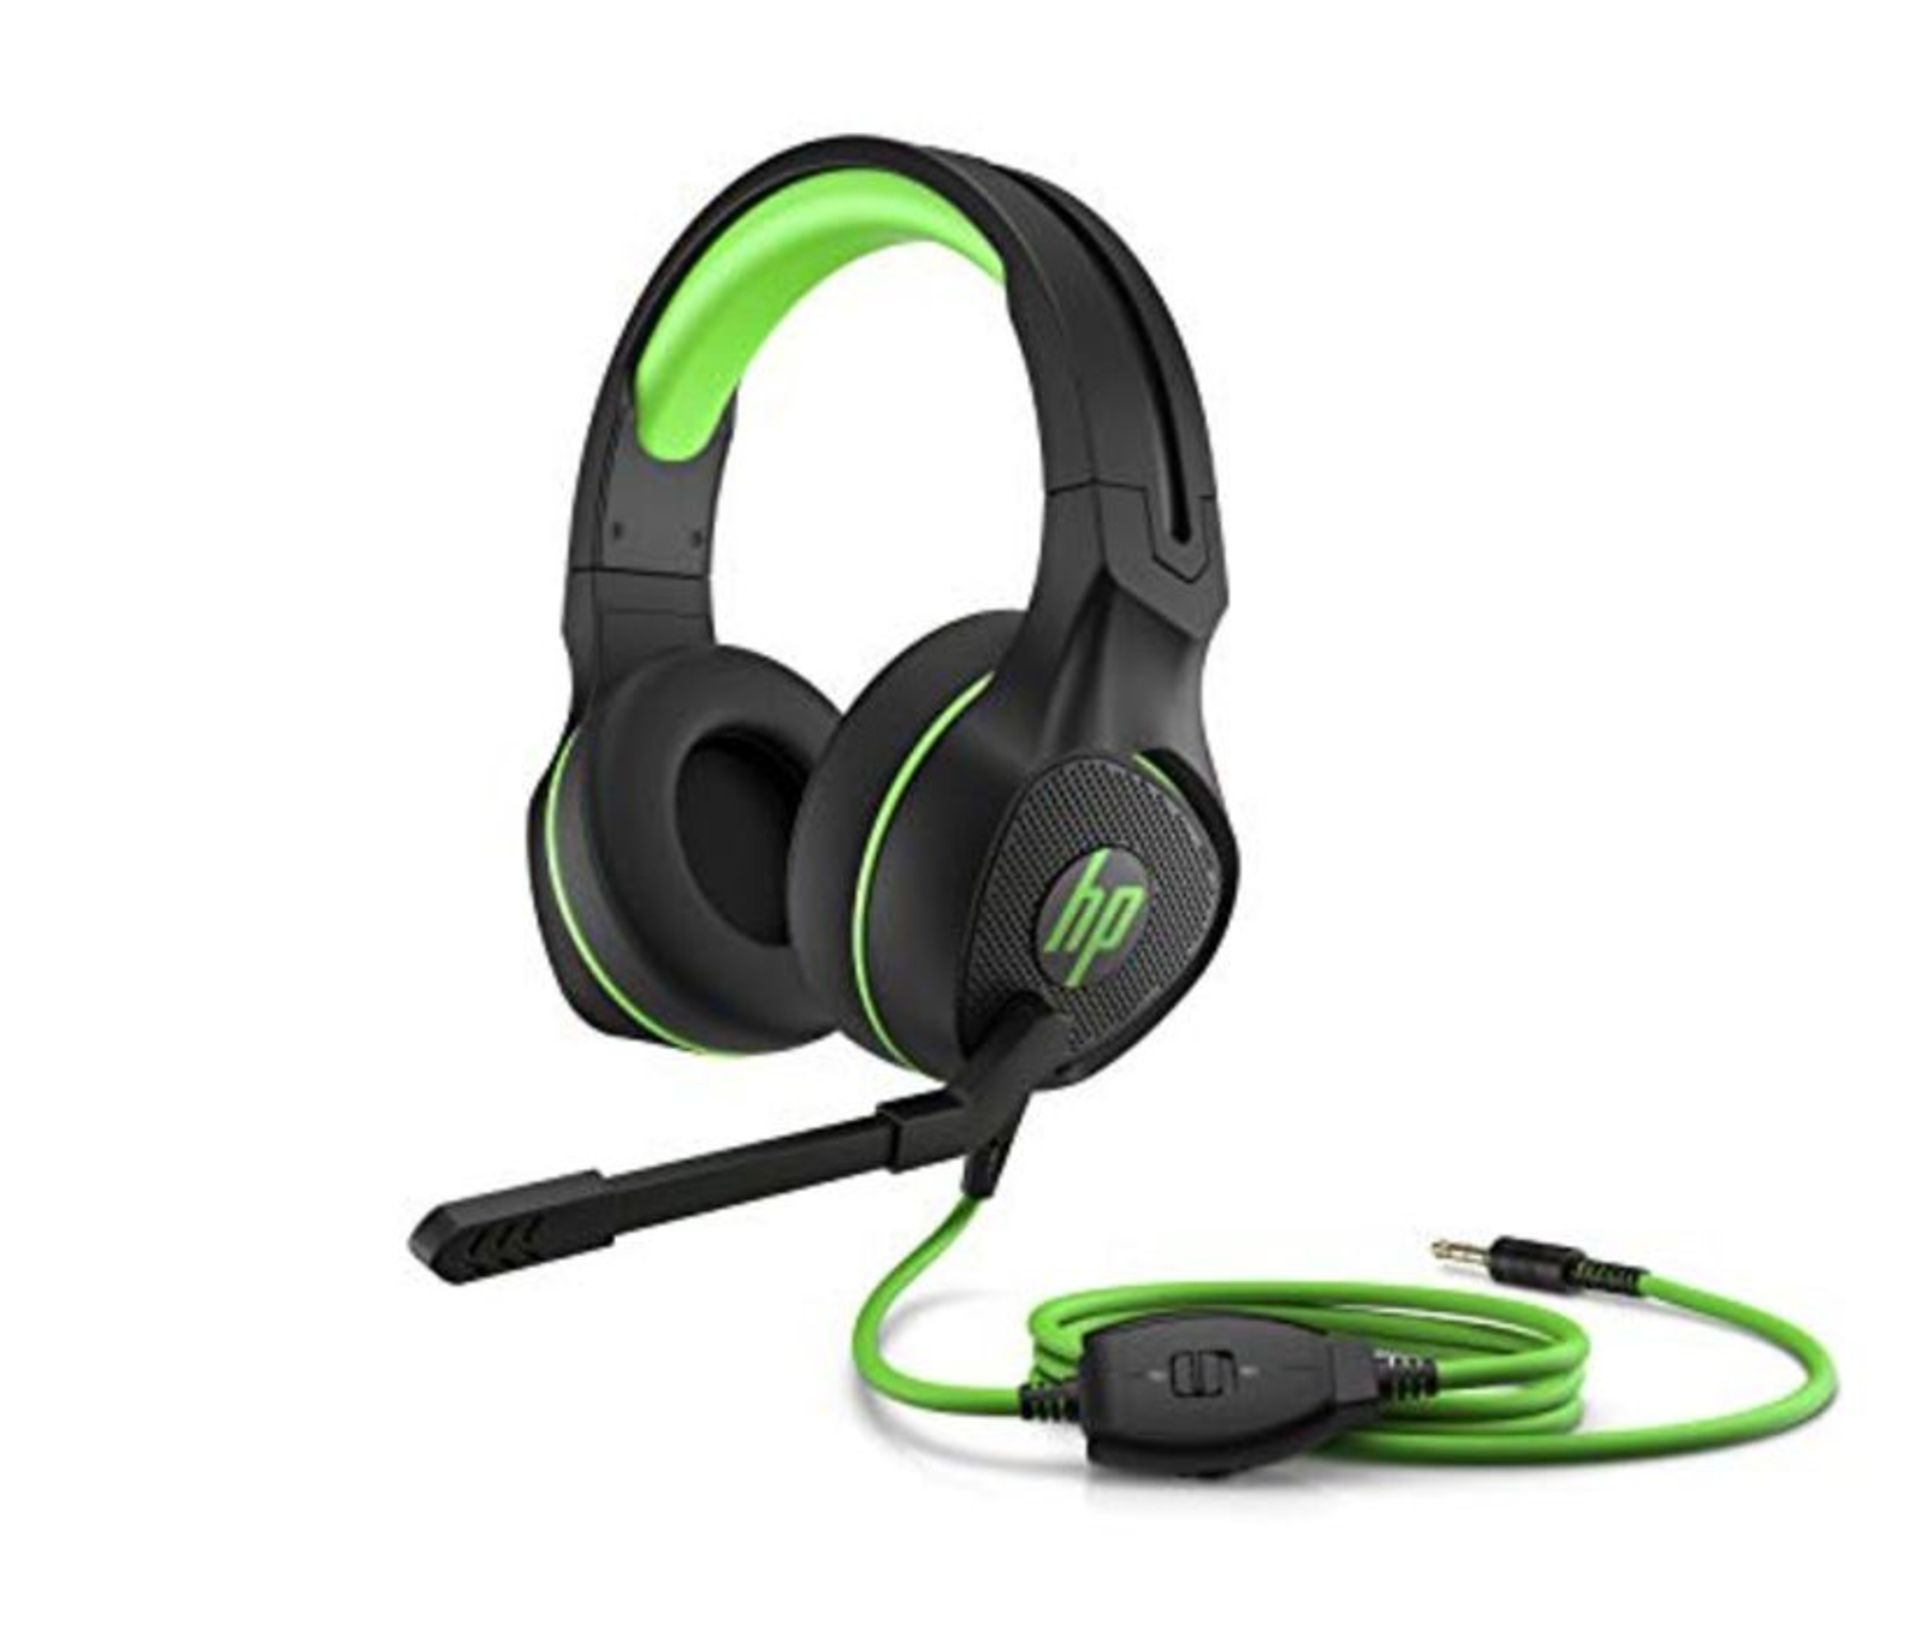 HP Pavilion Gaming Green Headset 400 - Padded Headset with Adjustable Mic and Control